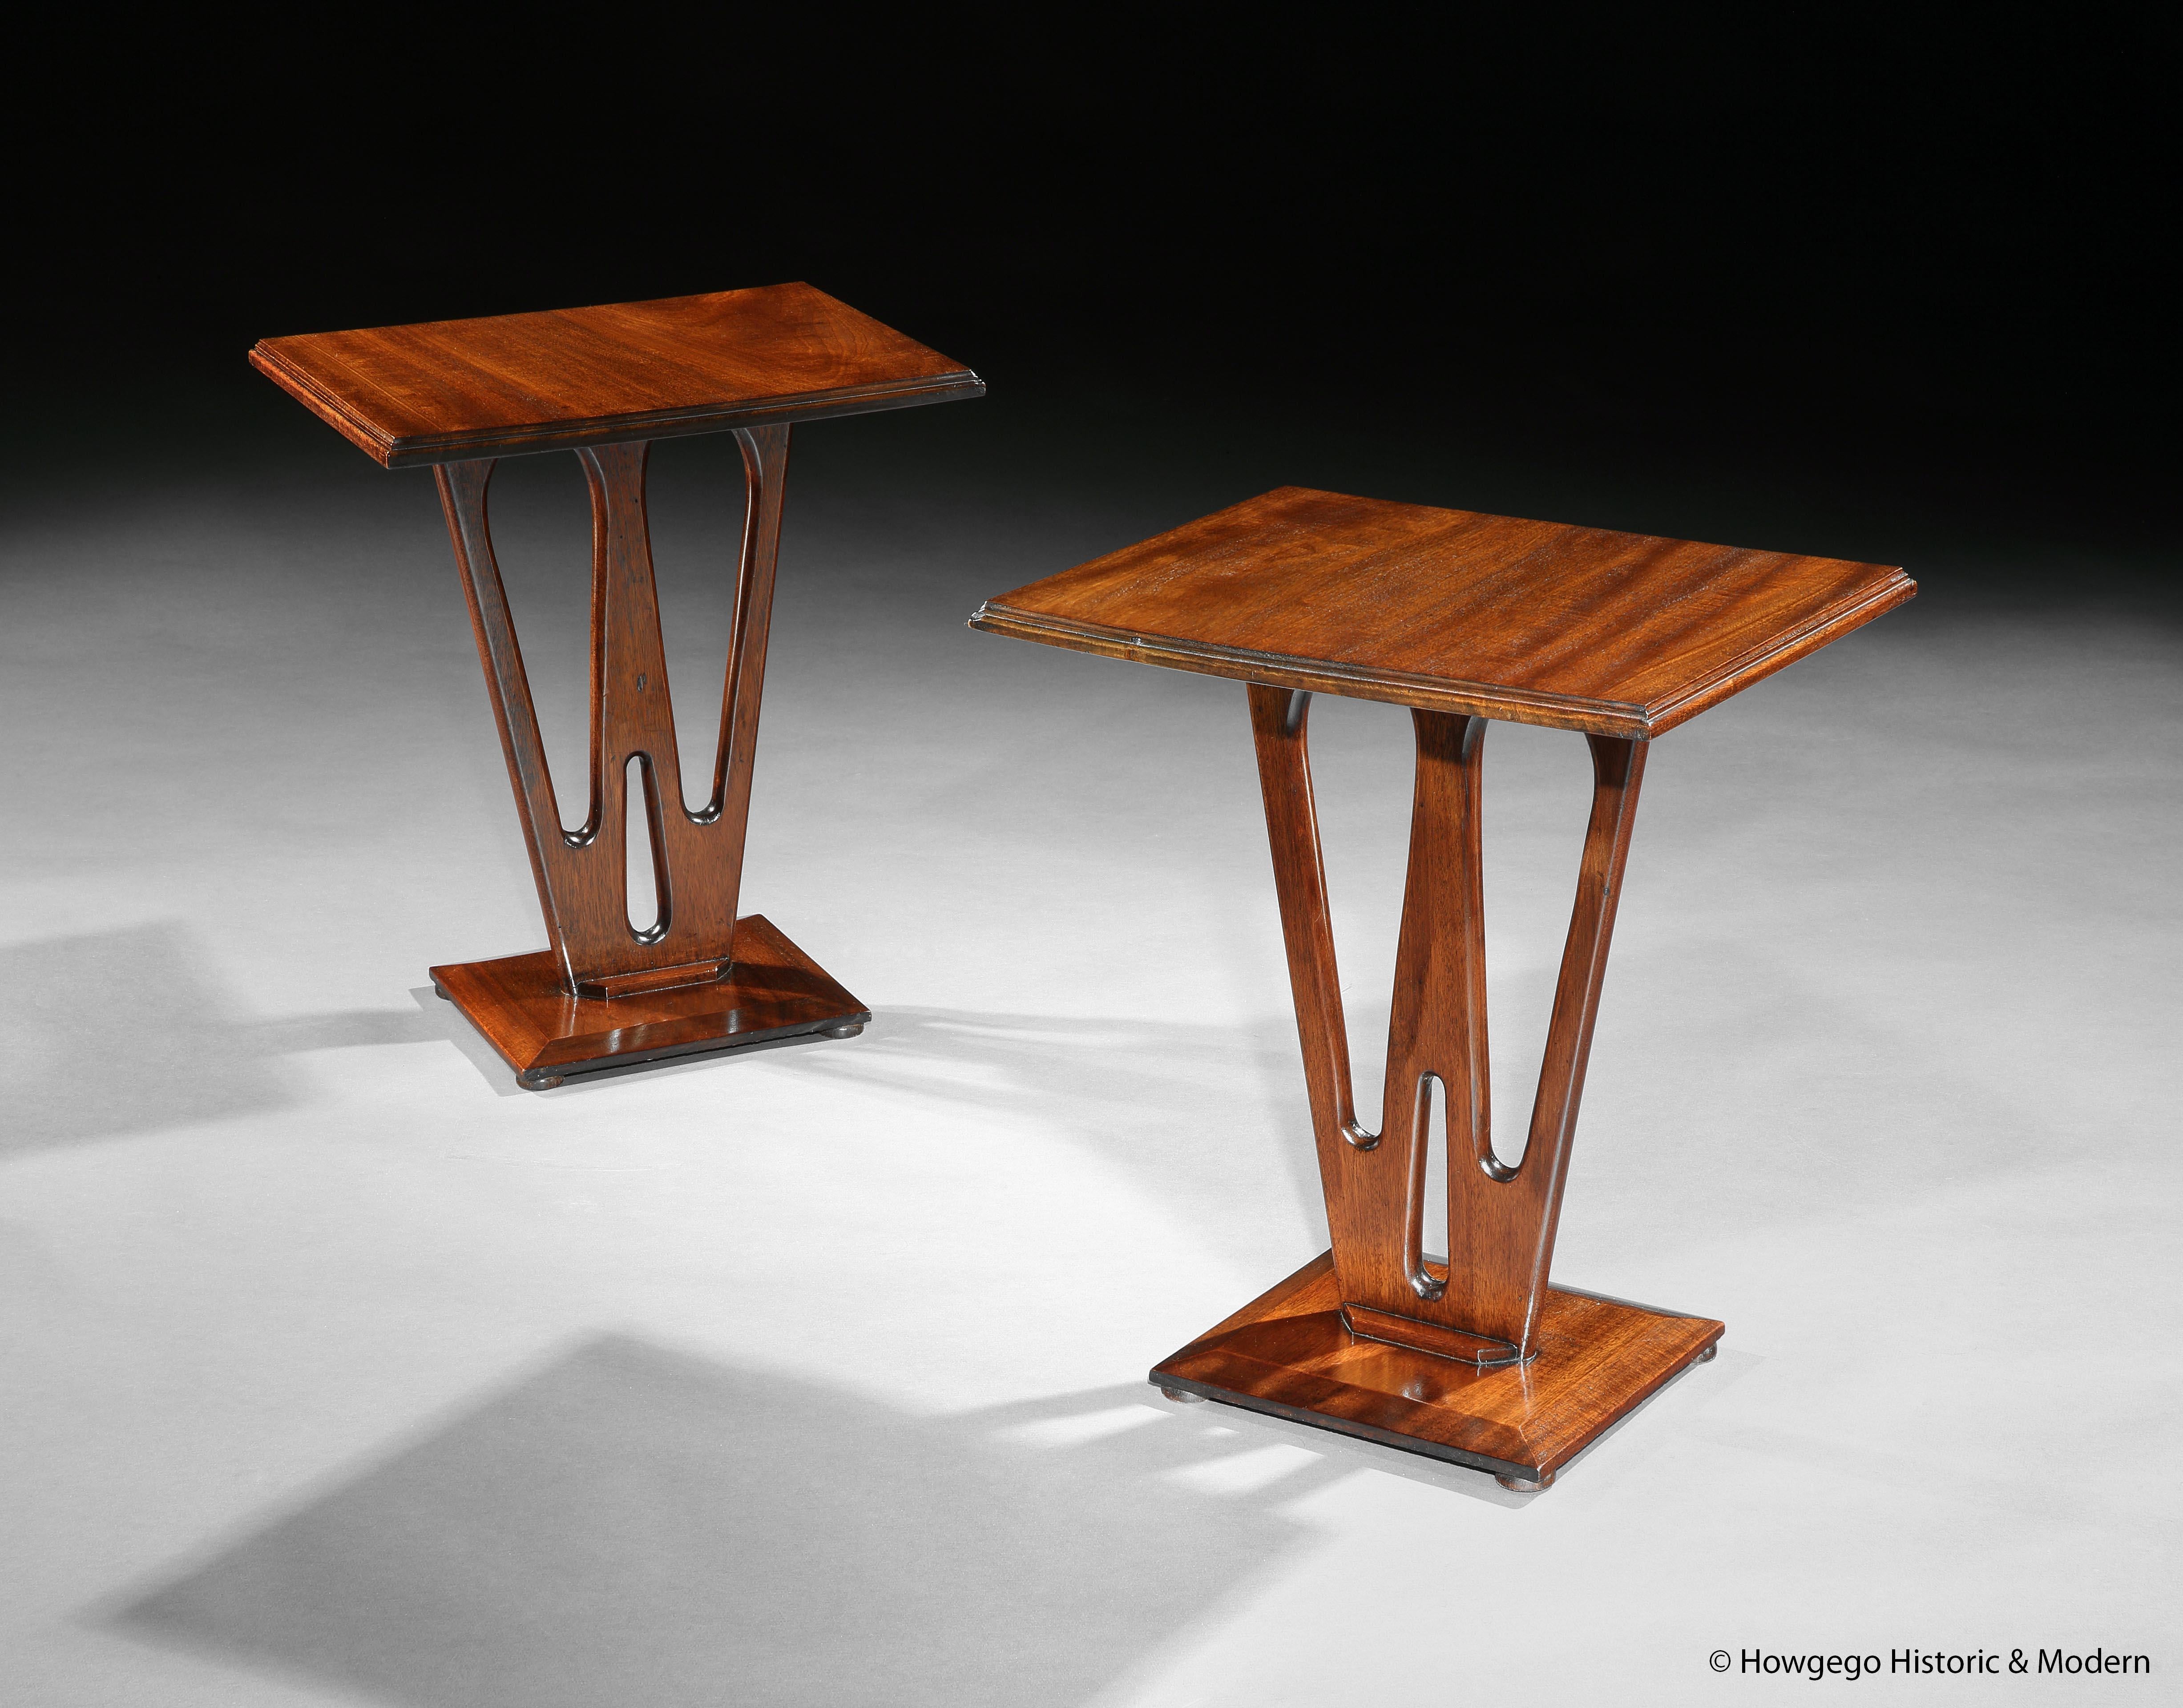 - Rare form with the fretwork trestle bases
- Fretwork trestle bases are really elegant and light
- Plinth bases create solid stability in the tables
- Practical size for sofa and bedside tables
- Finely grained teak with excellent original